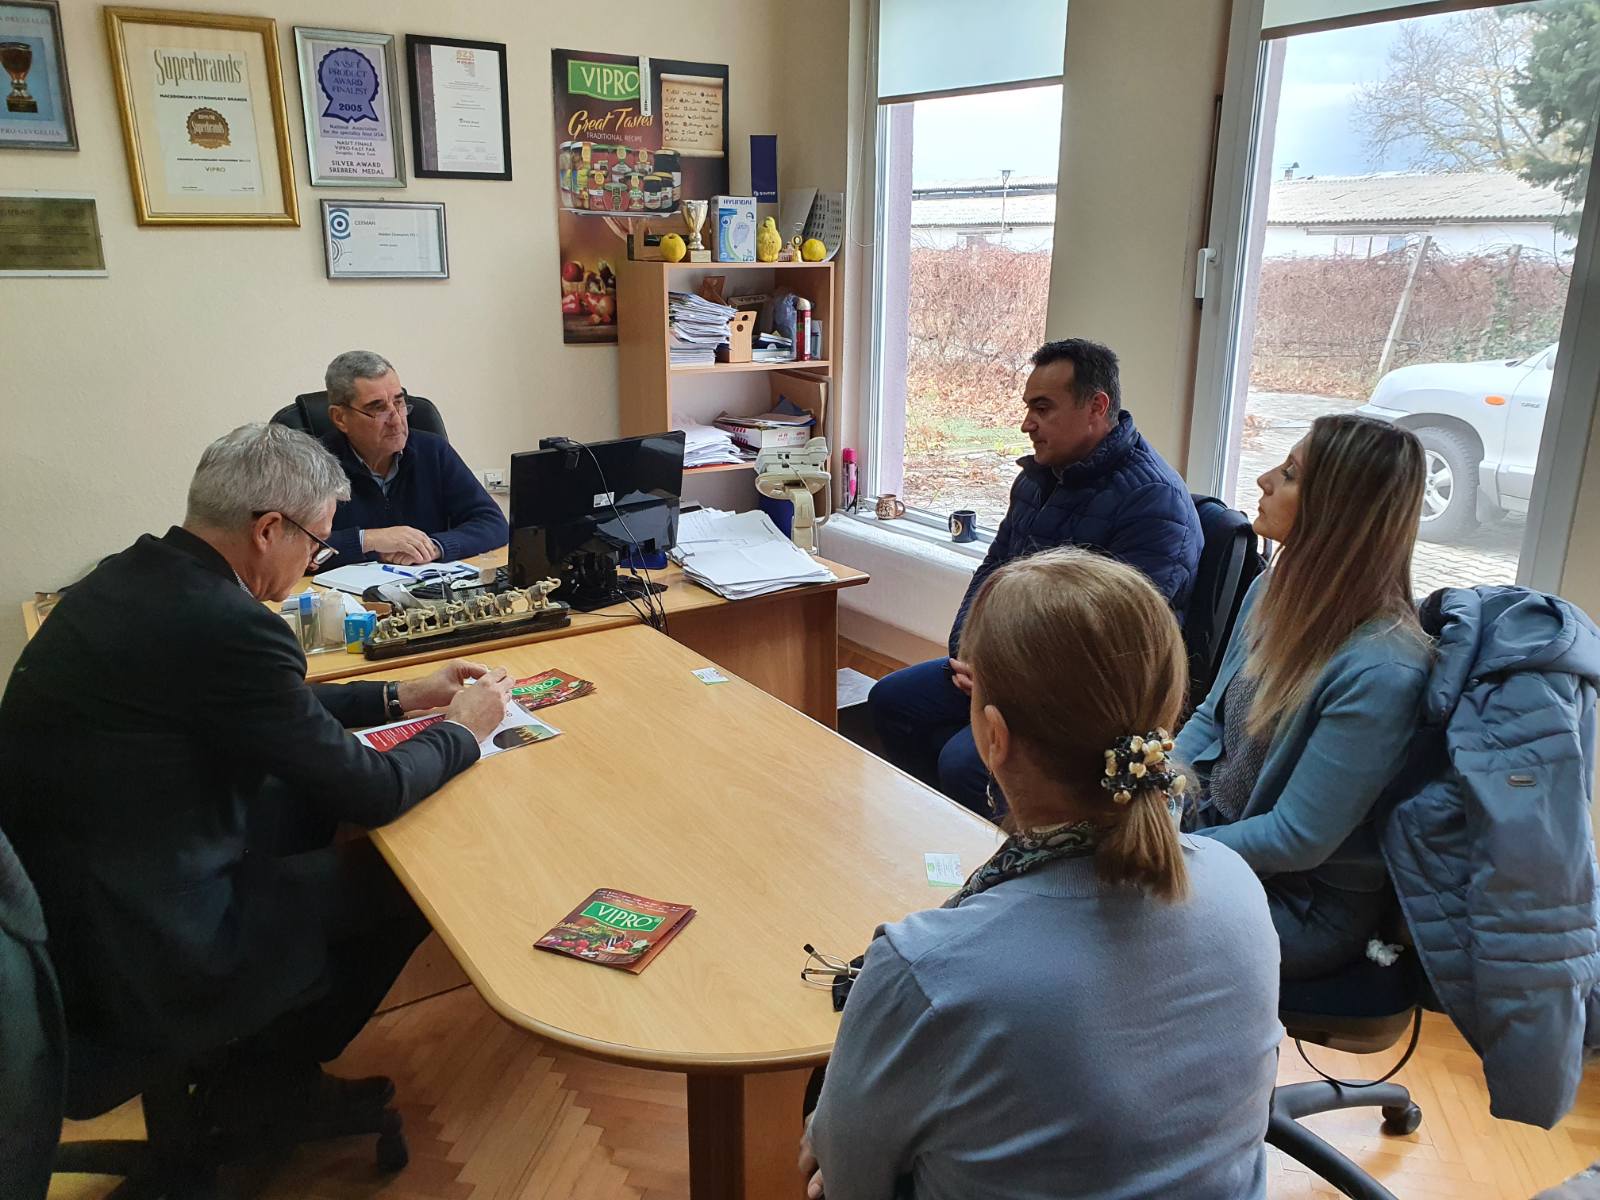 The visits of RDN representatives continue on the territory of LAG Bojmija